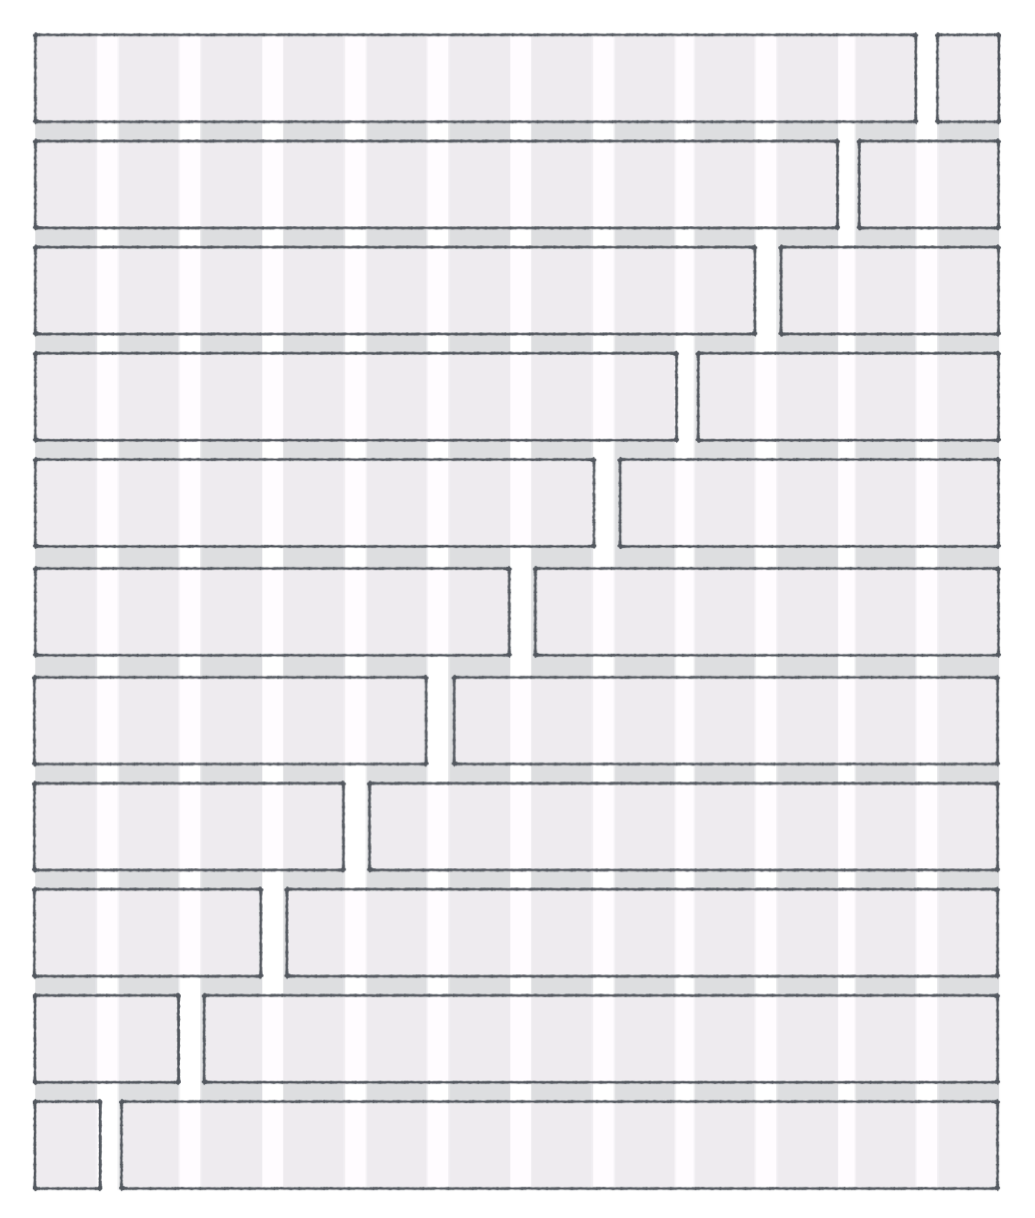 Possible combinations on a 12-column grid